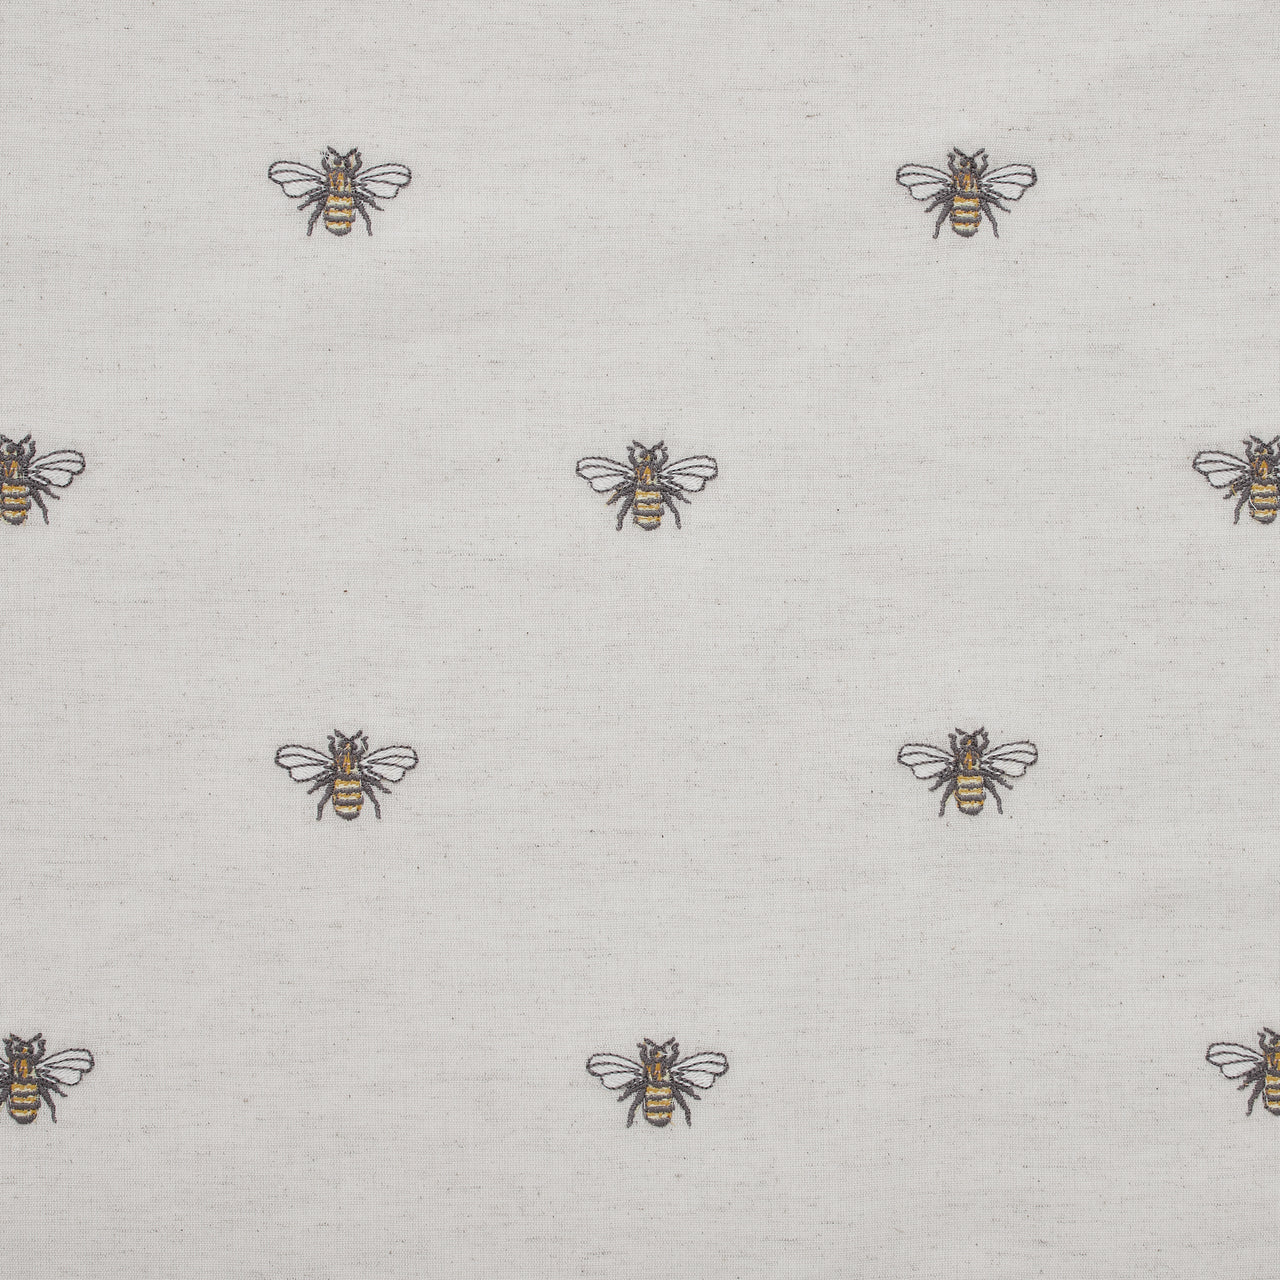 Embroidered Bee Runner 13x48 VHC Brands